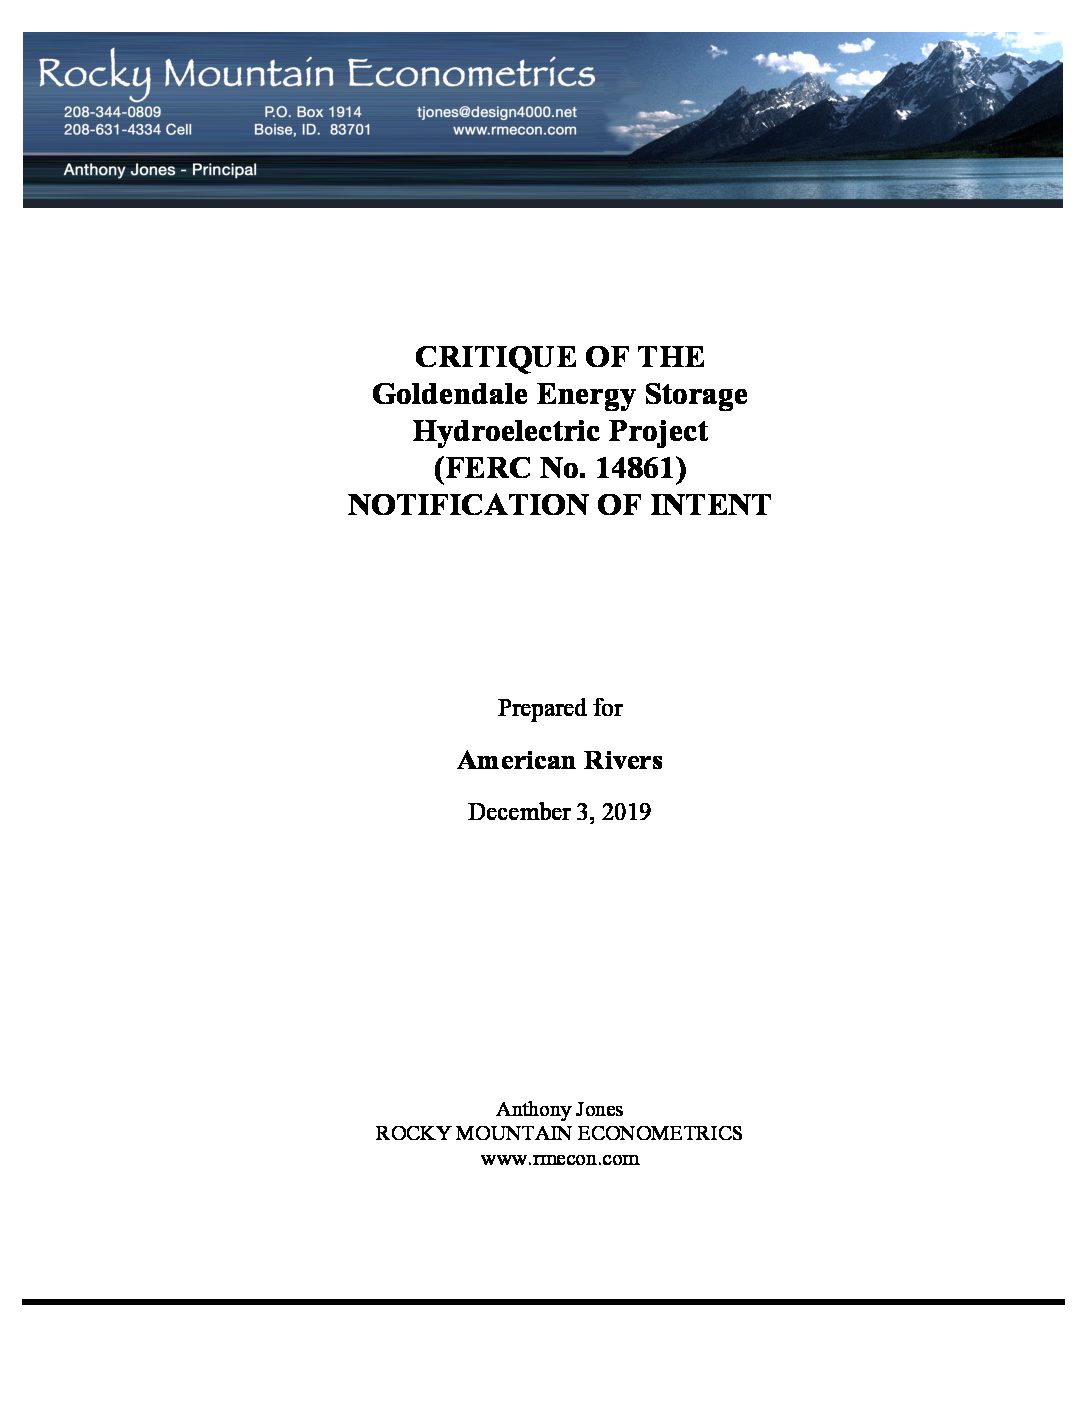 Critique of the Goldendale Energy Storage Hydroelectric Project (FERC No. P-14861)